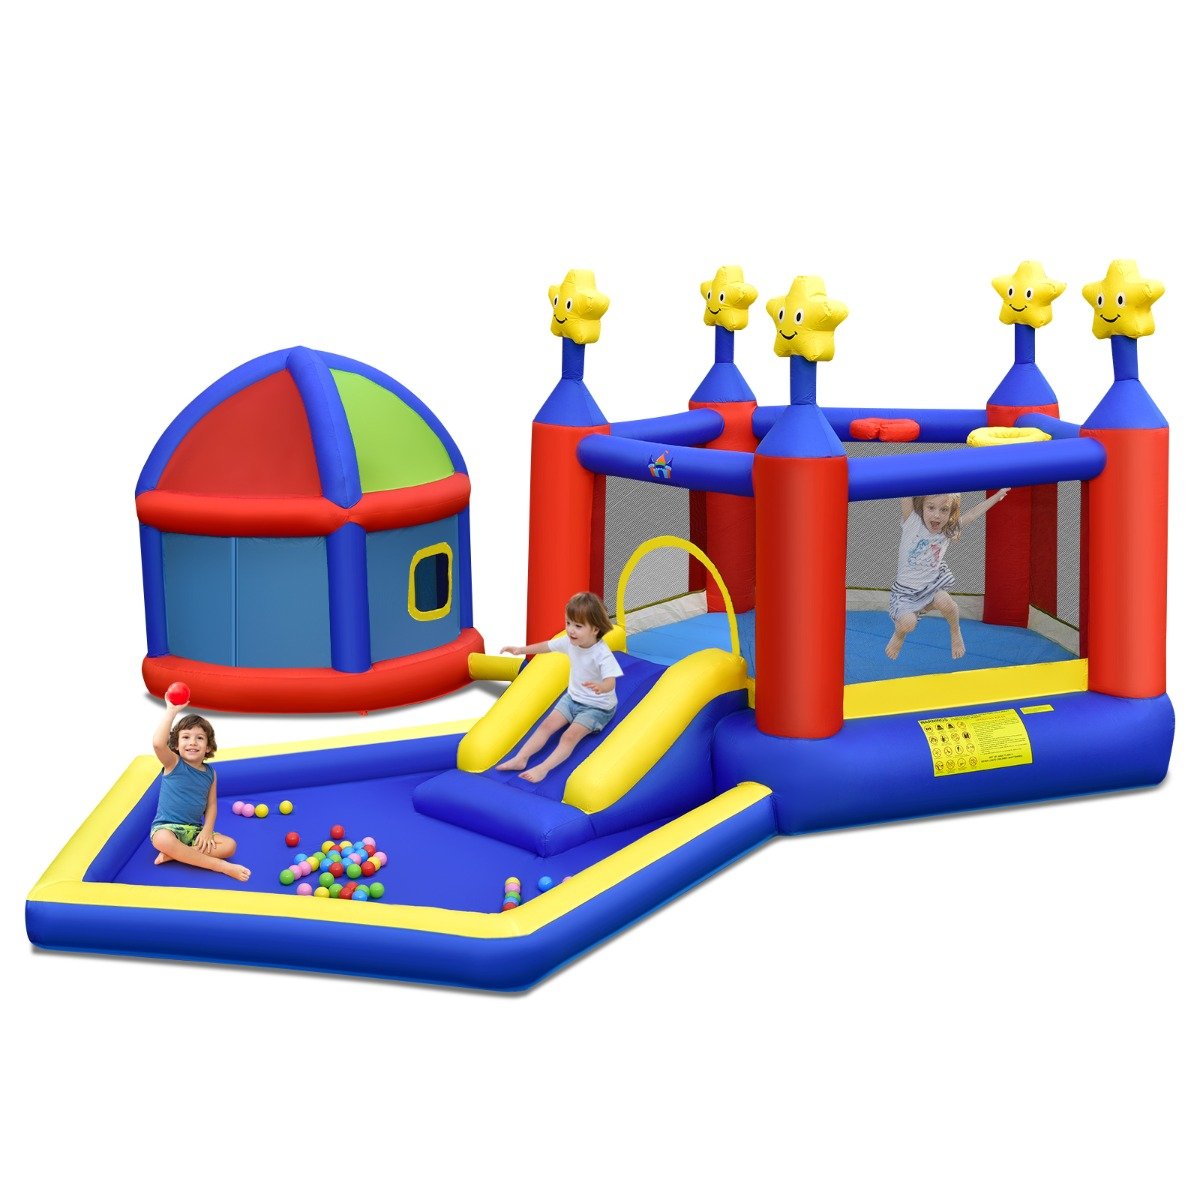 1Inflatable Bouncy House with Dual Basketball Hoops - Playful Entertainment